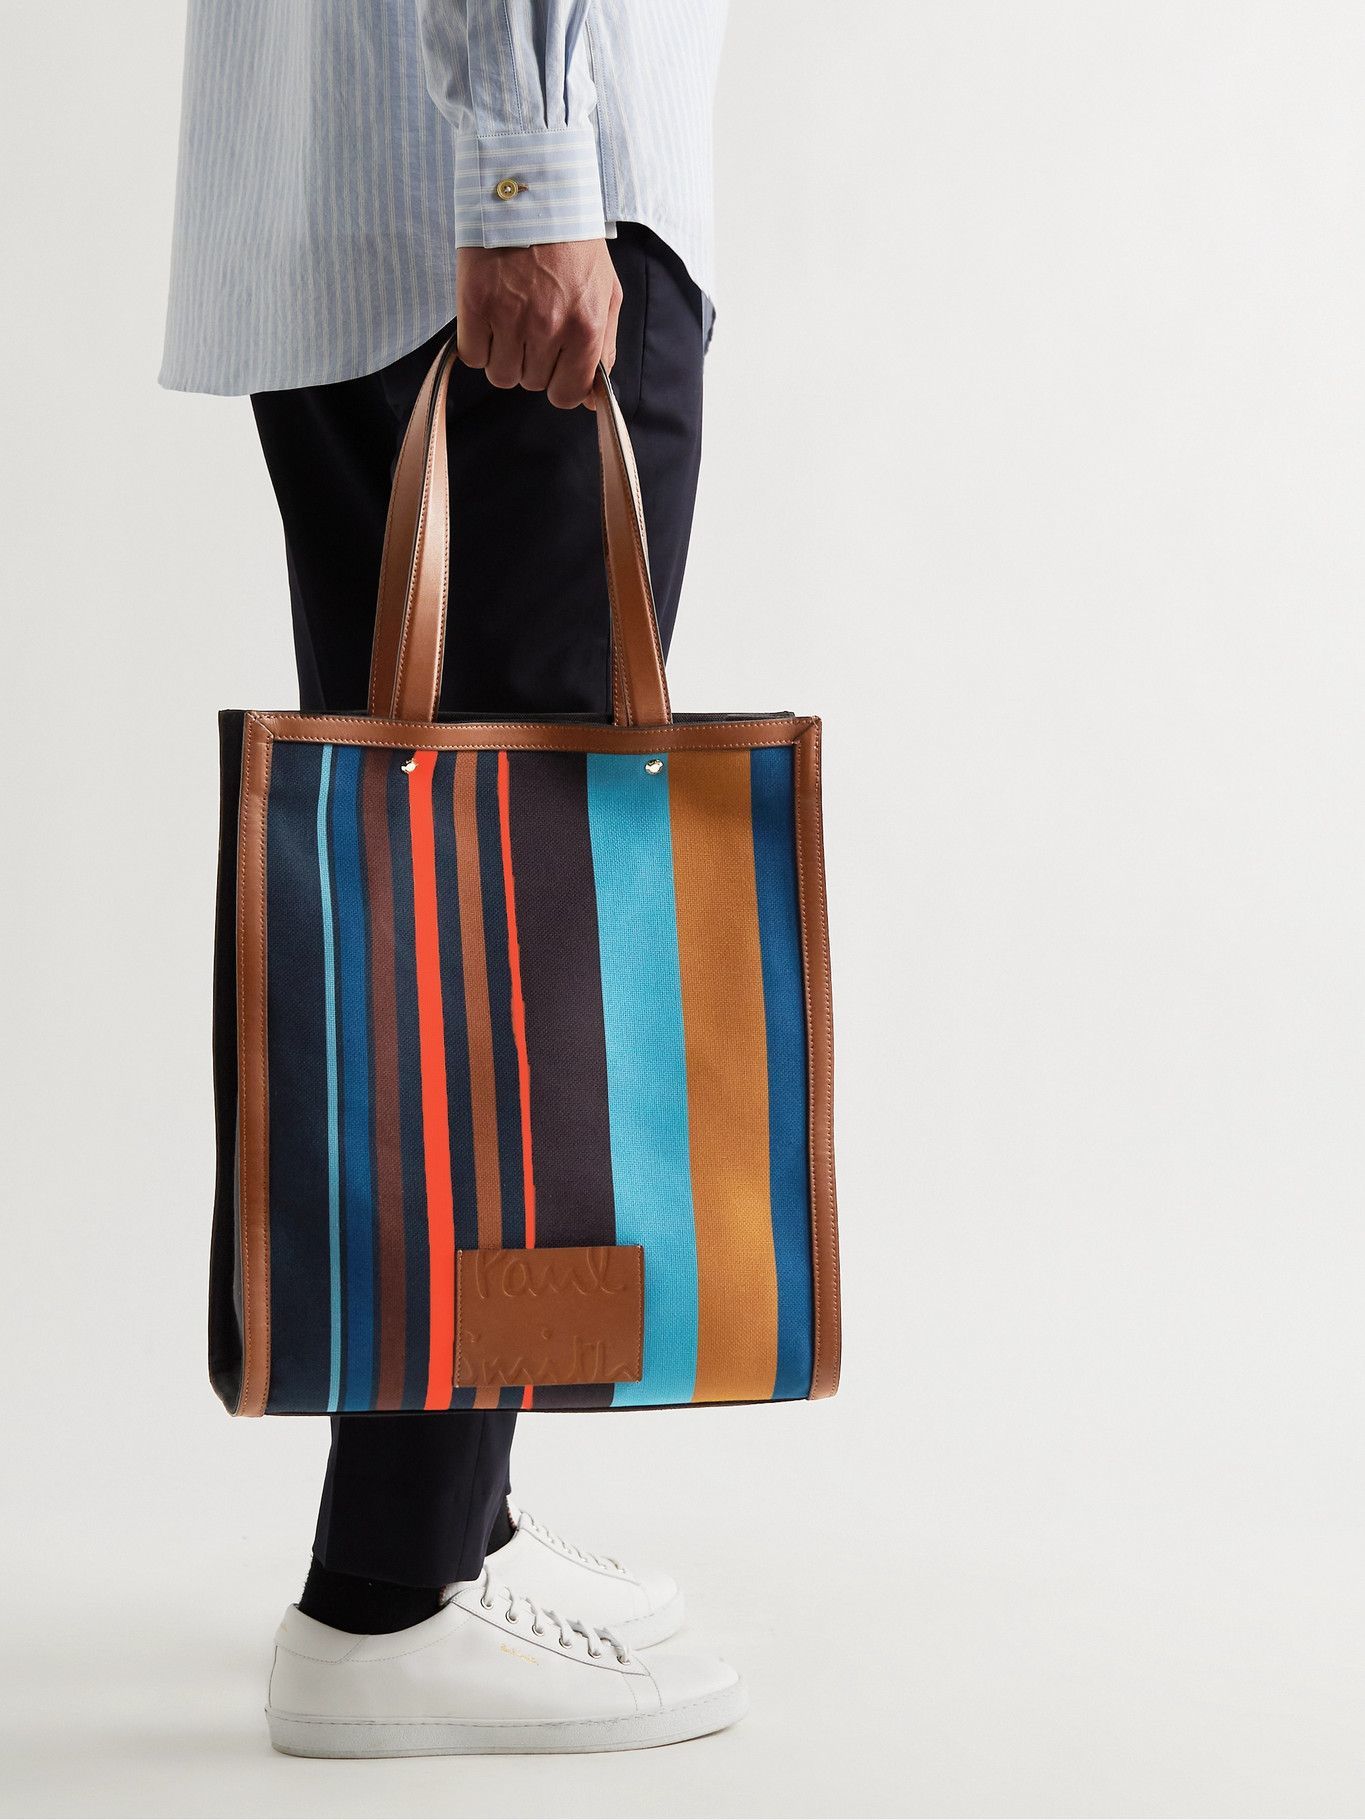 PAUL SMITH - Leather-Trimmed Striped Recycled Canvas Tote Bag Paul Smith